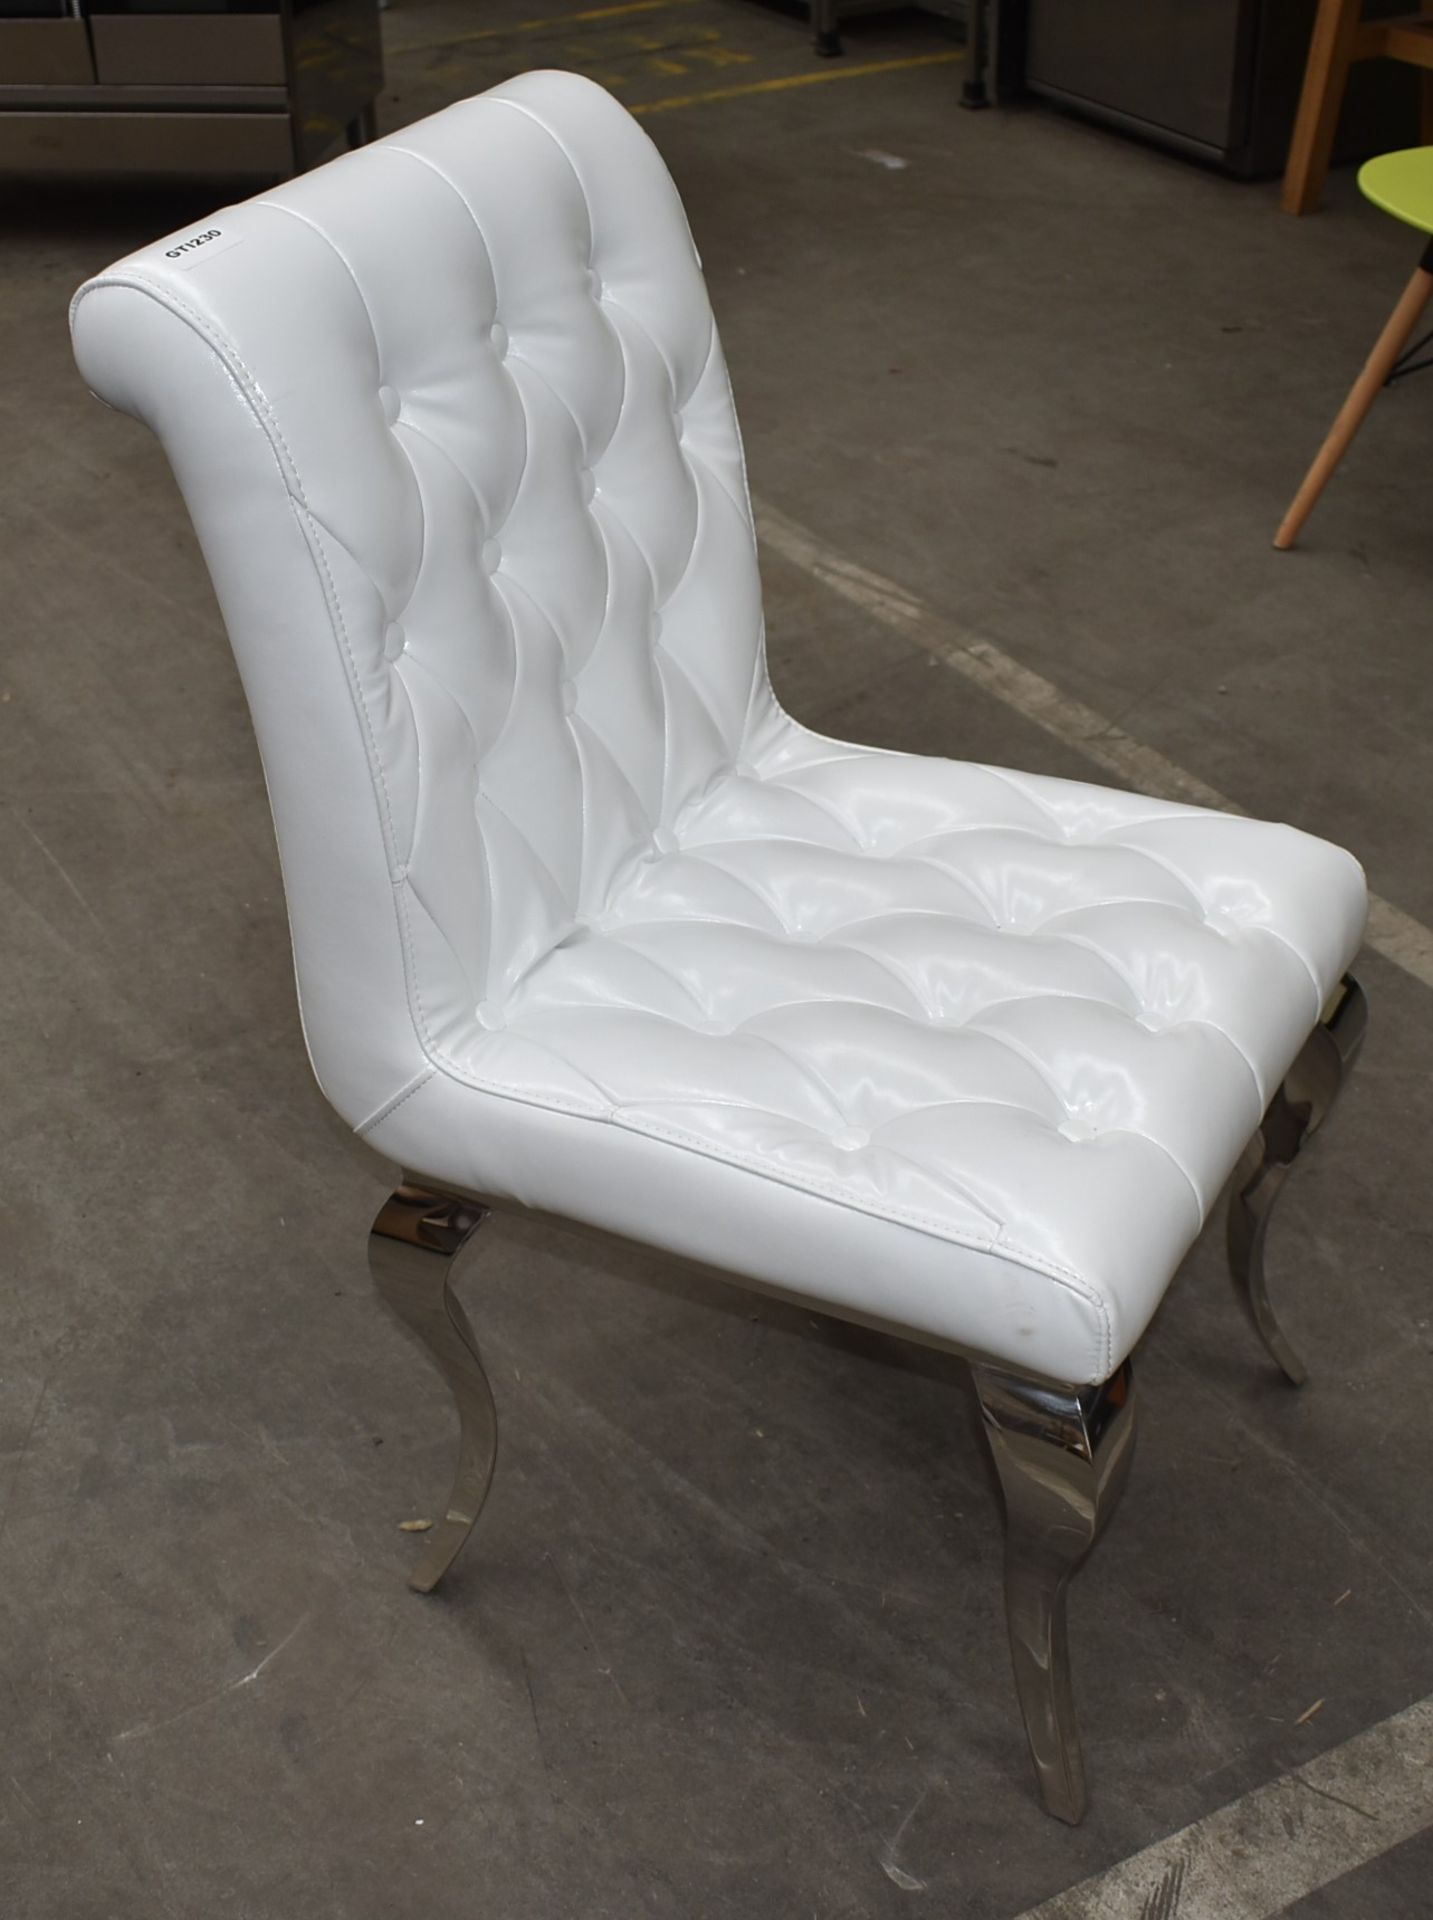 1 x Elegant White Leather Studded Bedroom Chair With Scroll Back and Chrome Legs - CL999 - Ref - Image 3 of 6